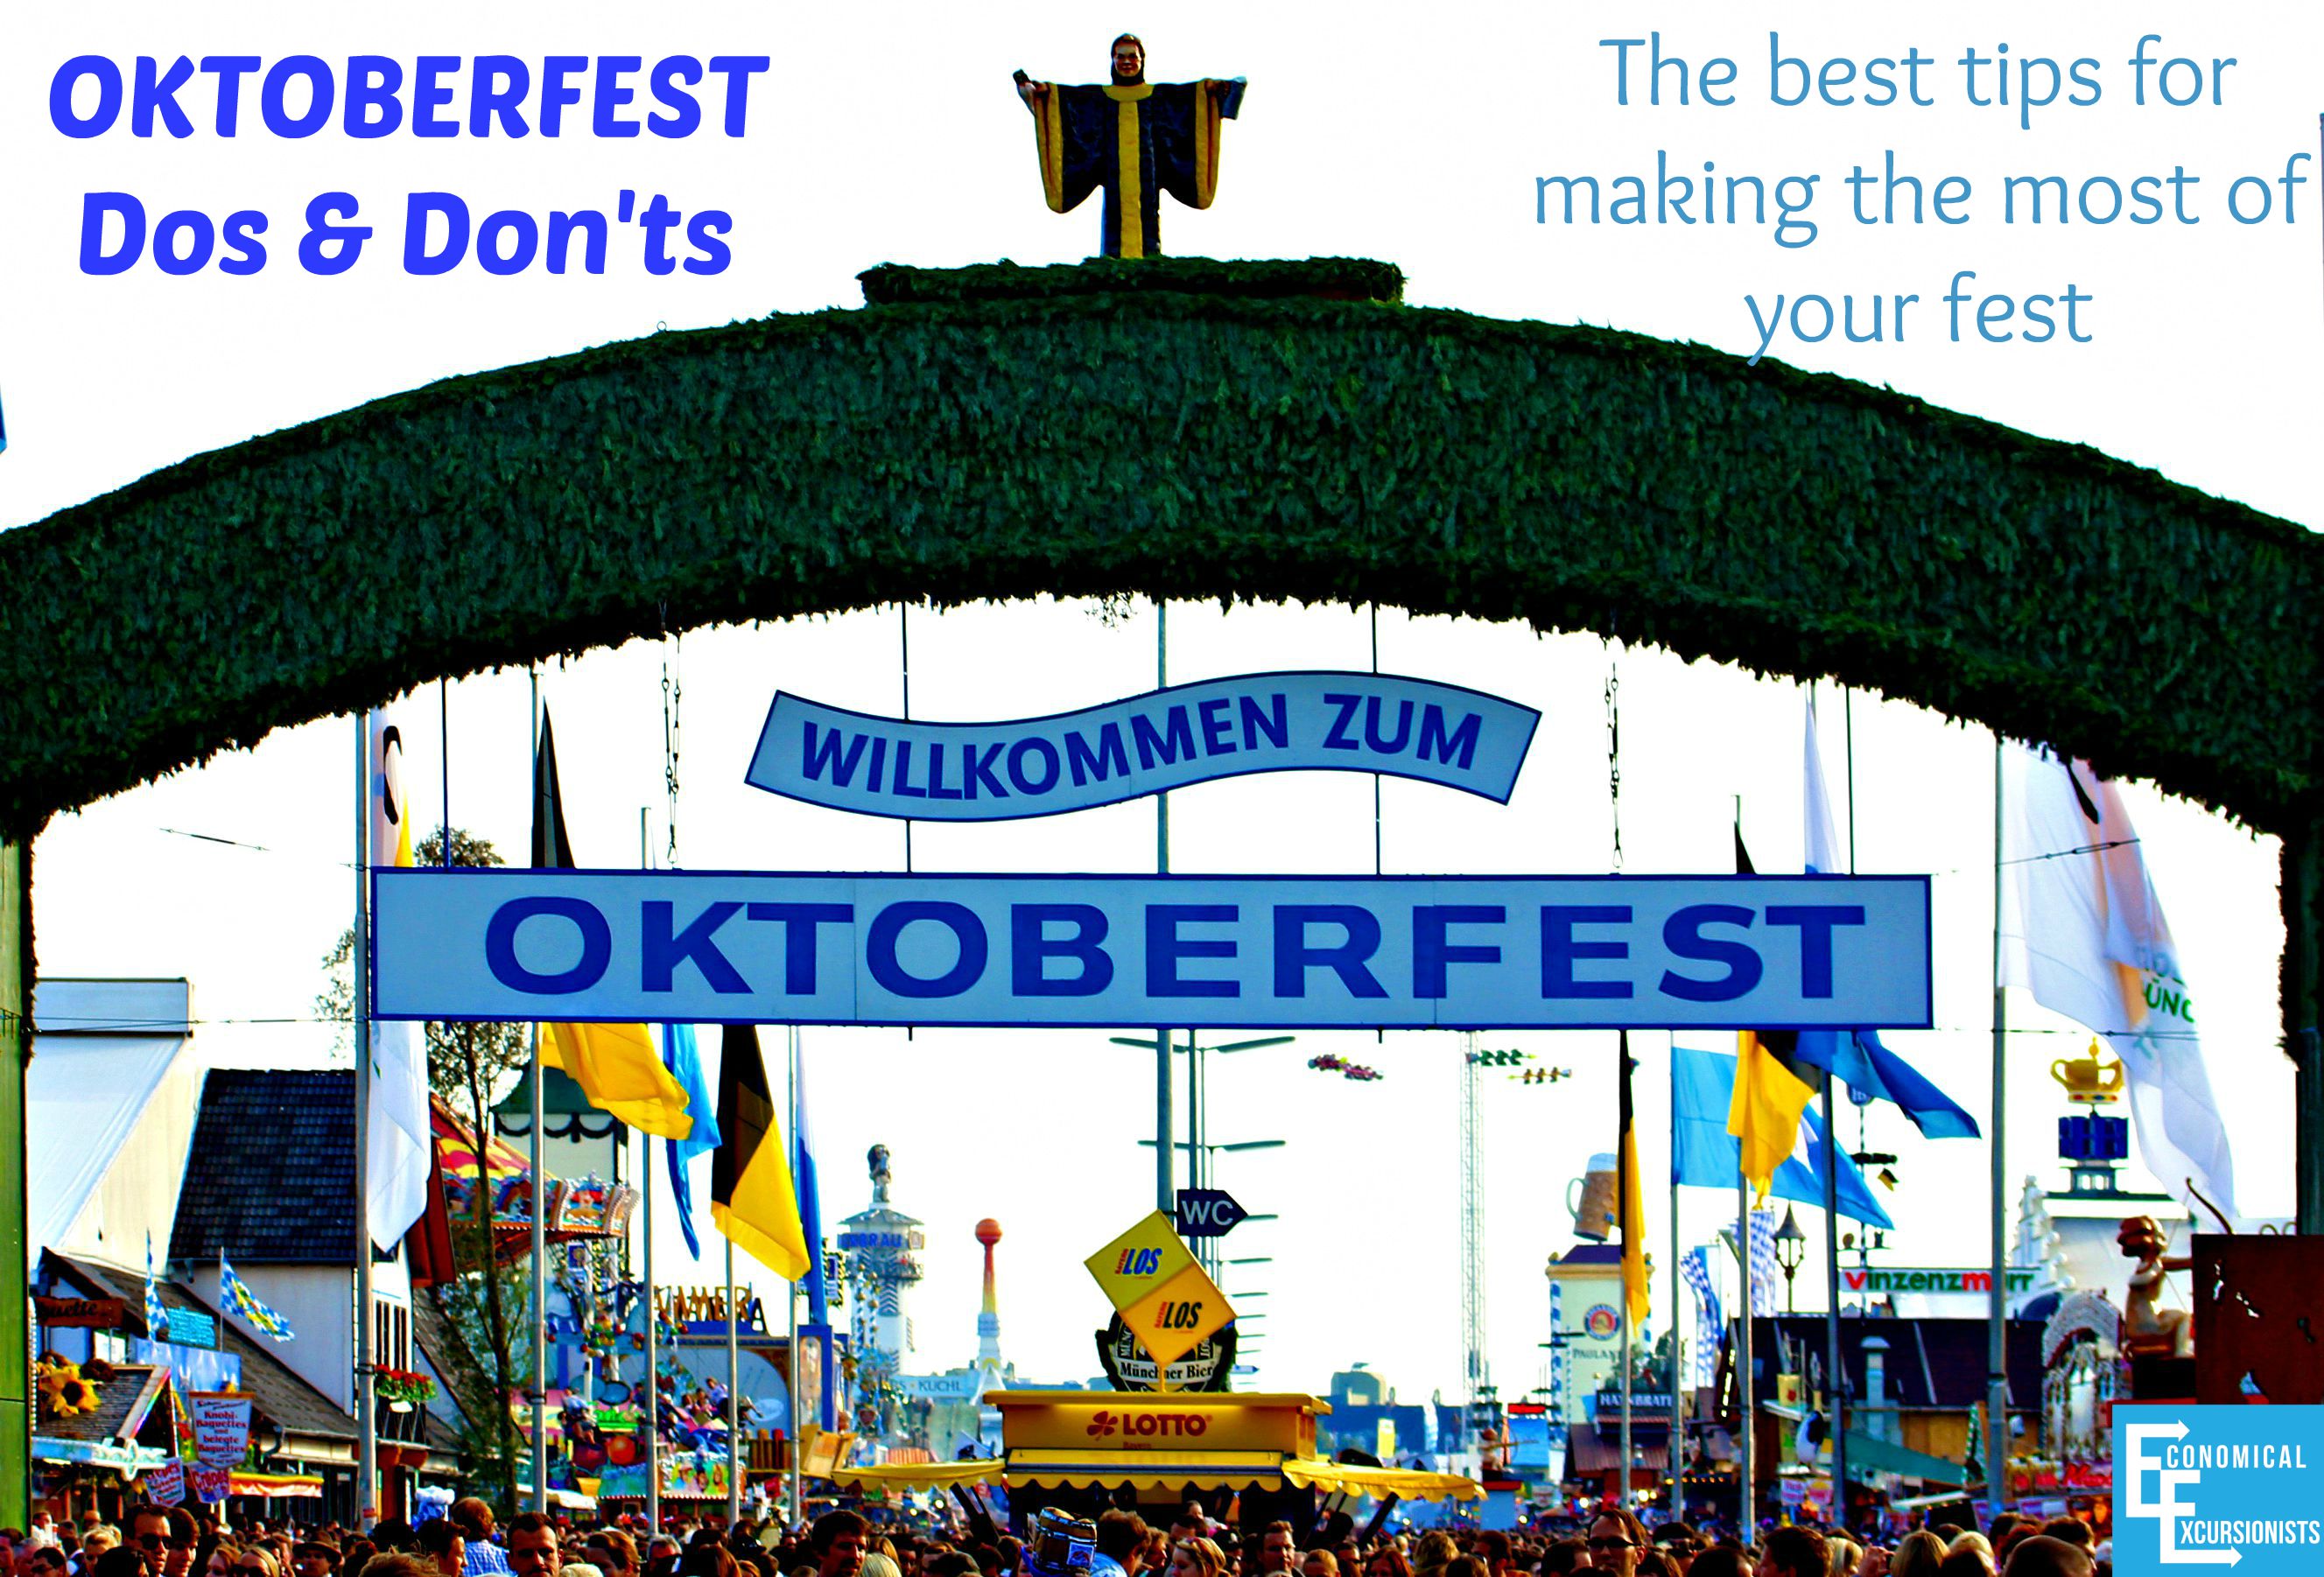 Oktoberfest Everything you need to know